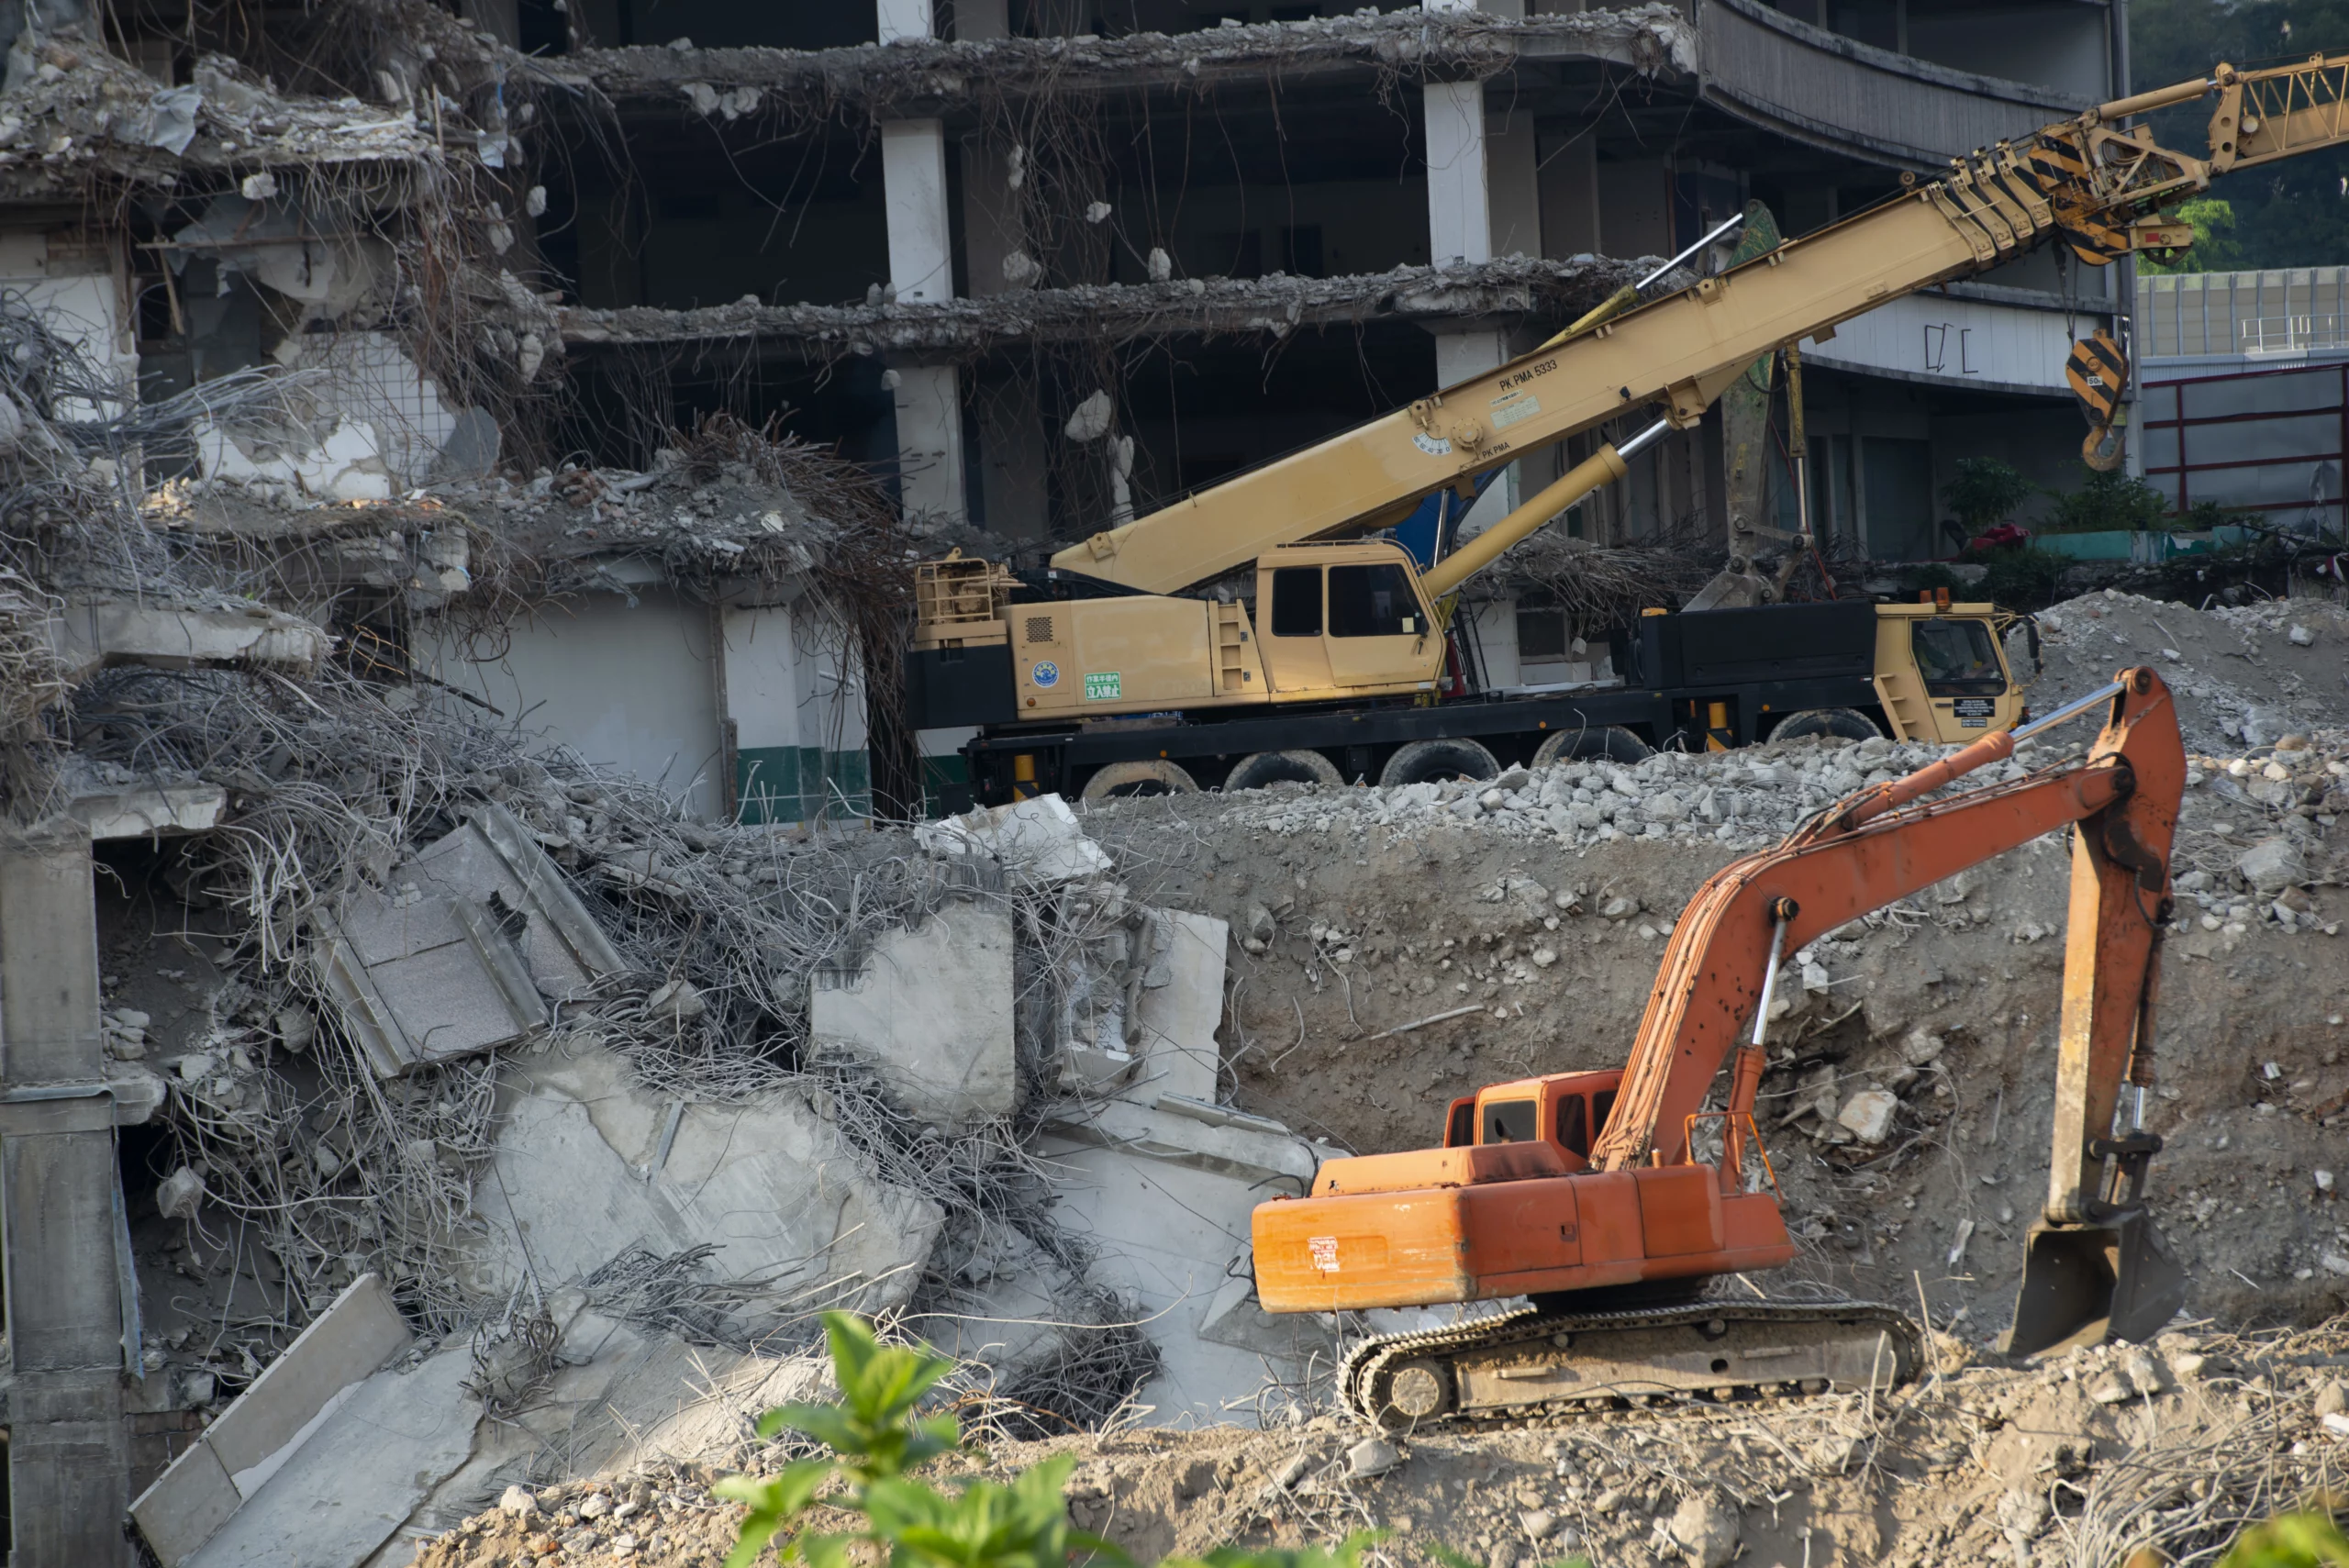 pieces-of-metal-and-stone-are-crumbling-from-demolition